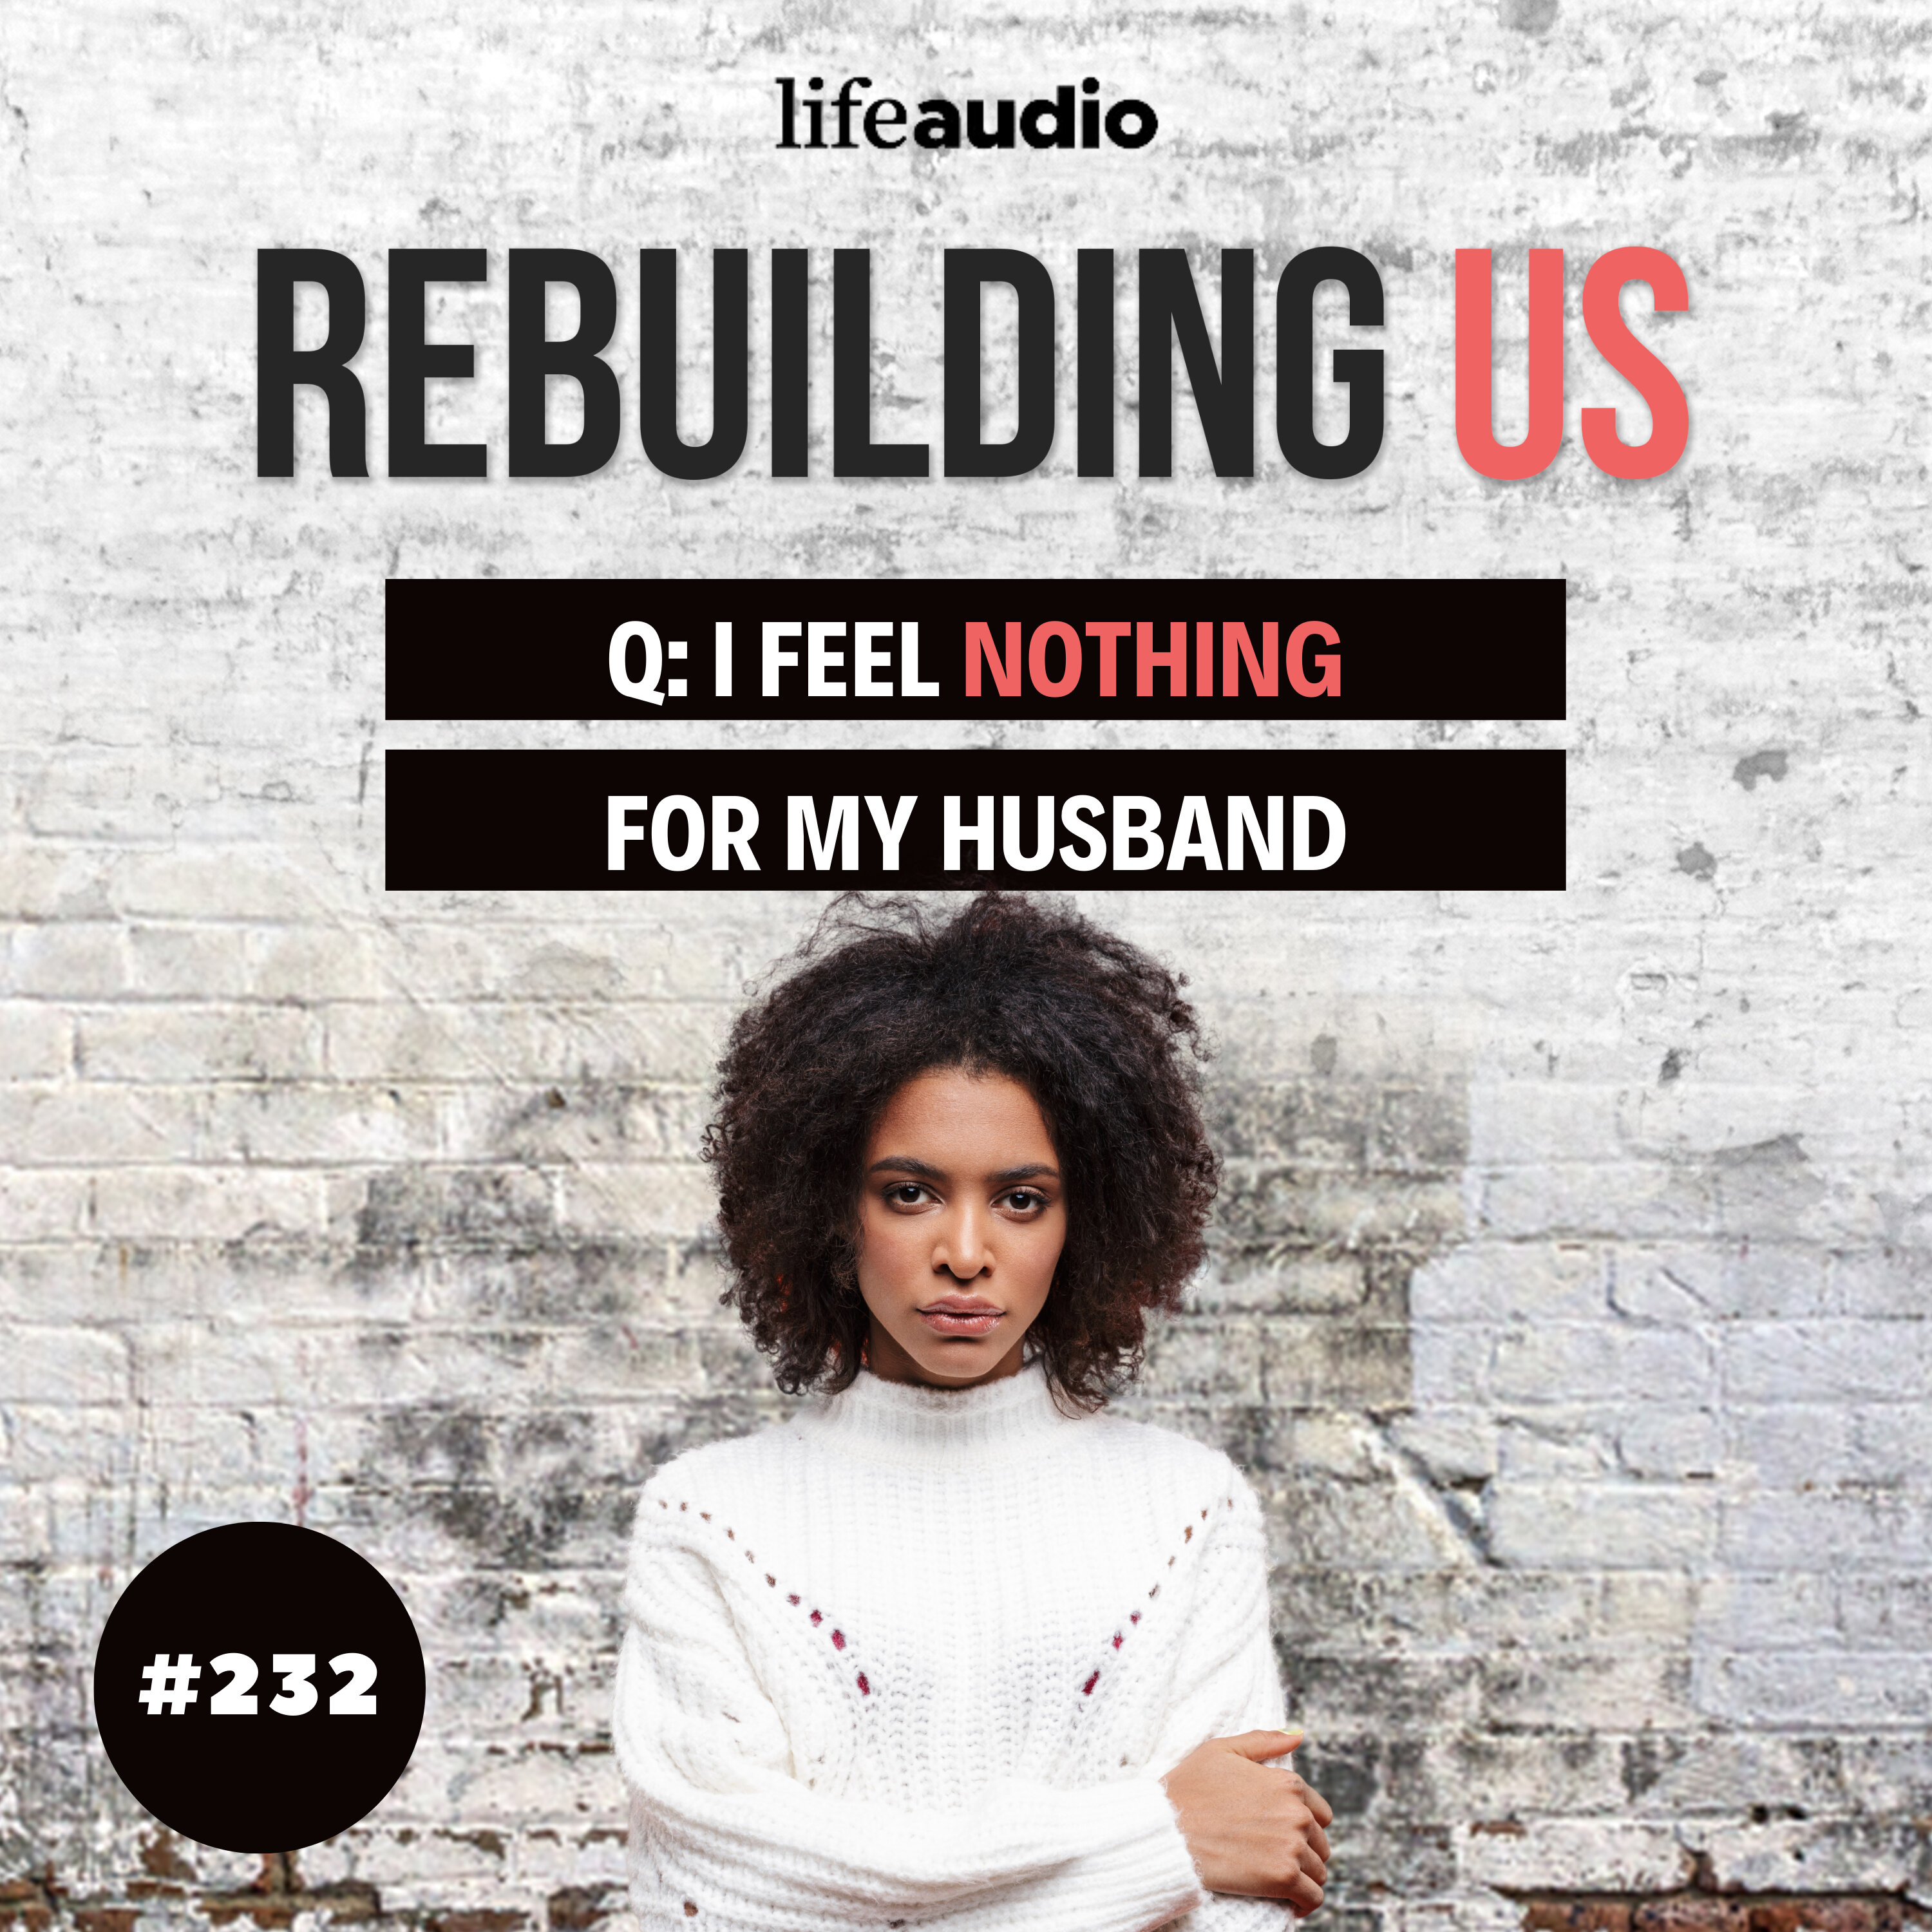 Q & A: I Feel Nothing For My Spouse & We're Living Separate Lives